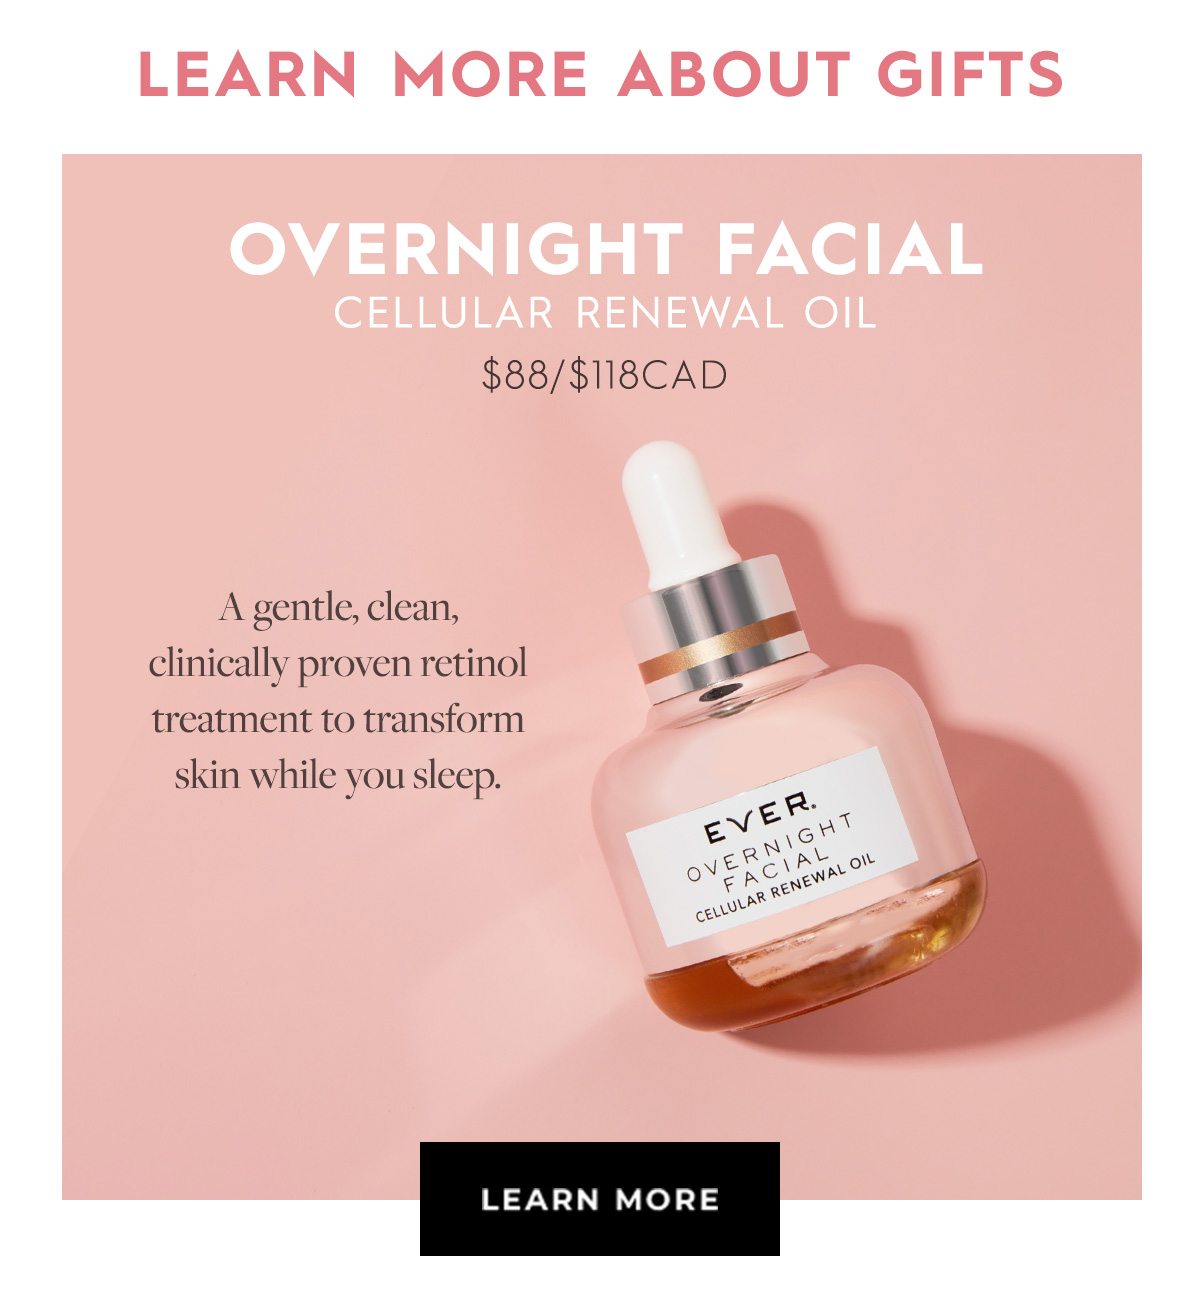 Overnight Facial Cellular Renewal Oil - LEARN MORE